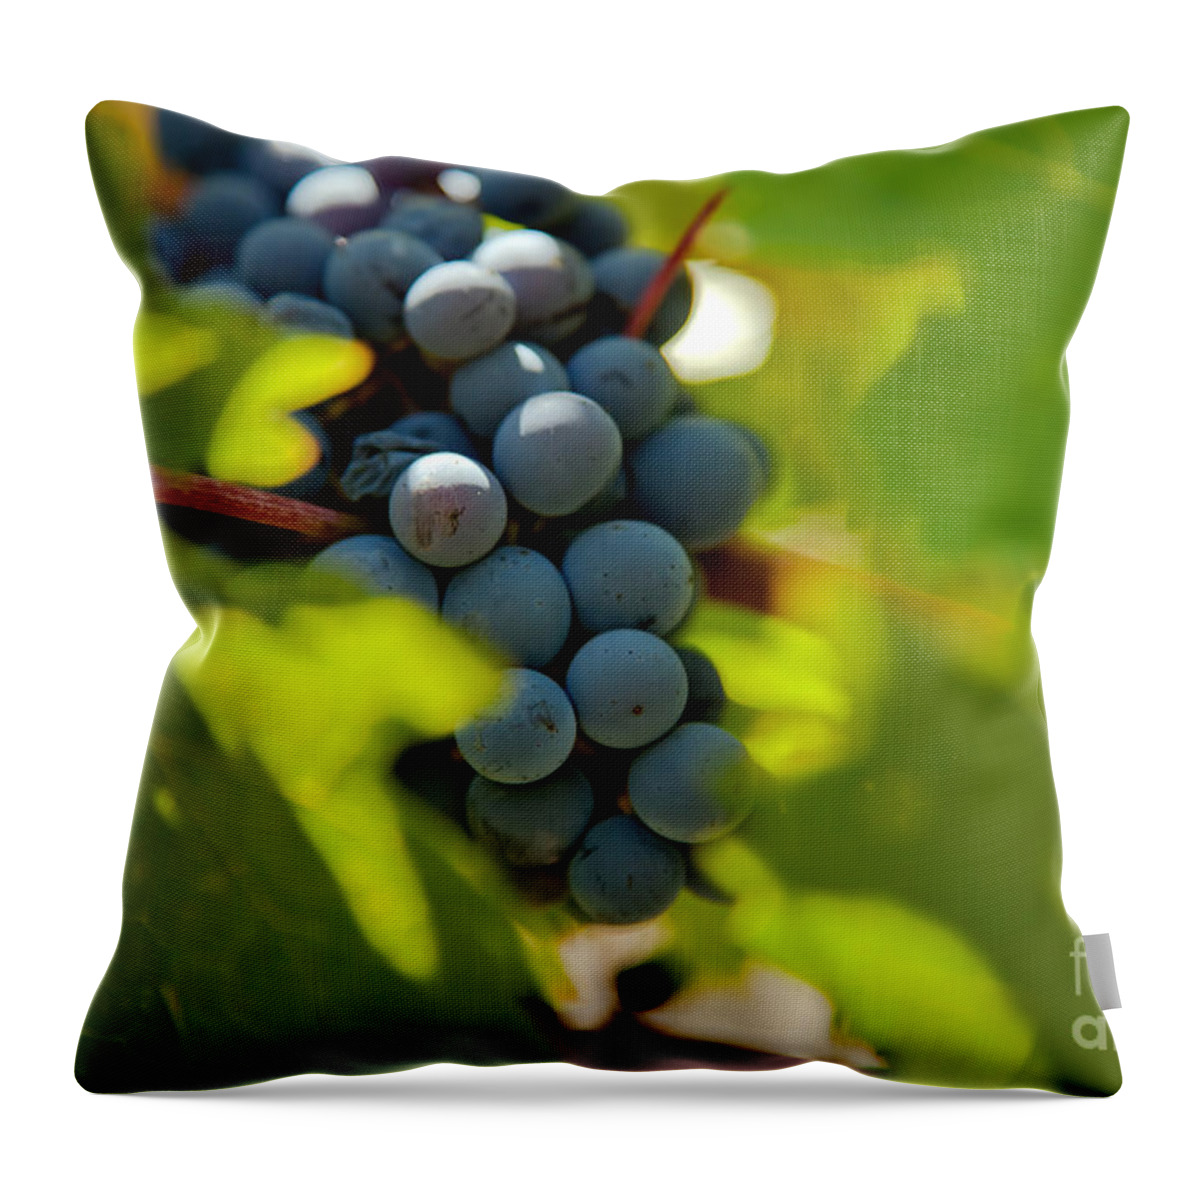 Abstract Throw Pillow featuring the photograph Harvest Season 3 by Jonathan Nguyen